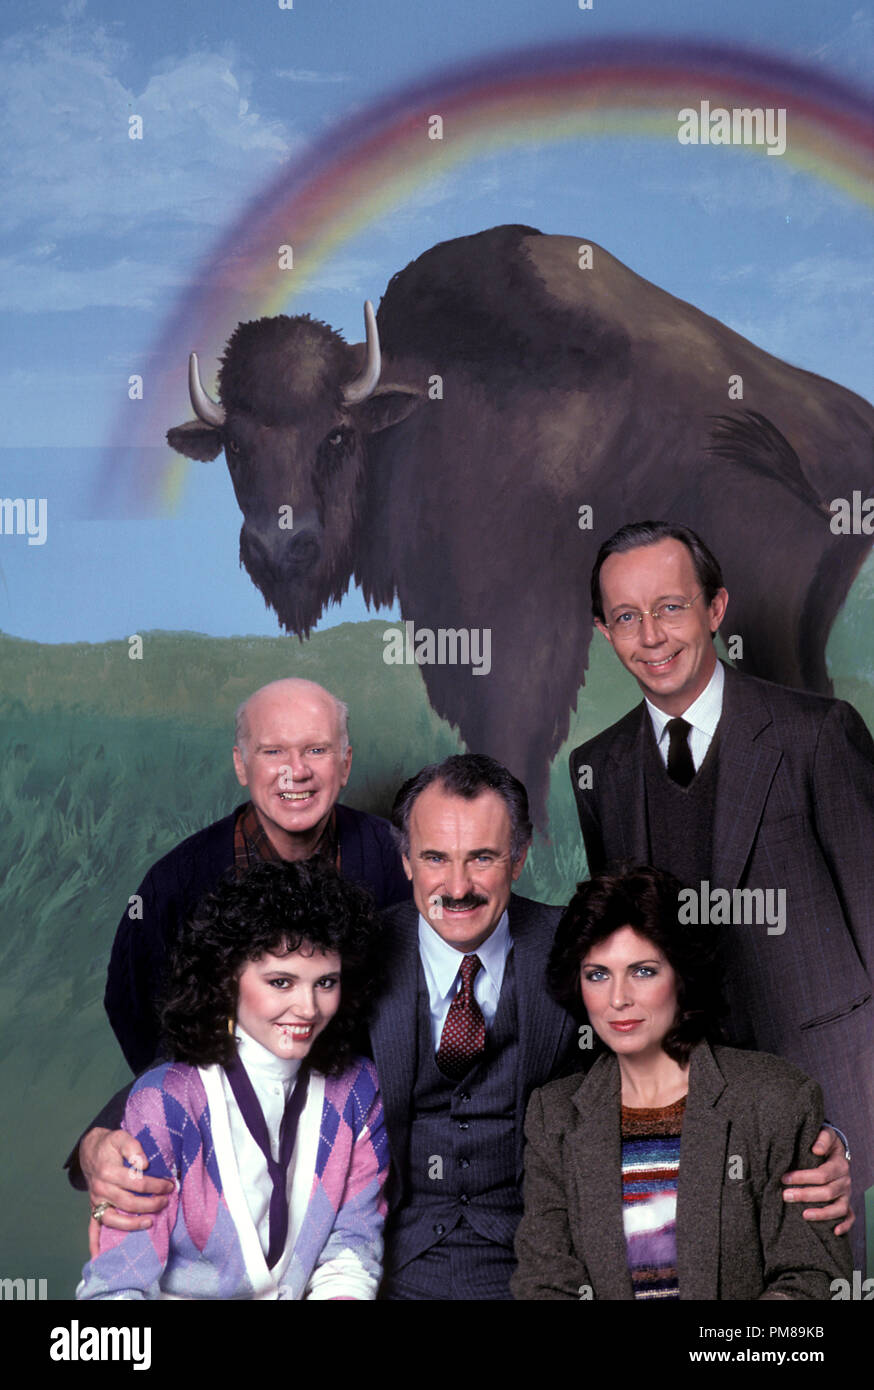 Studio Publicity Still from 'Buffalo Bill' Geena Davis, John Fiedler, Dabney Coleman, Max Wright, Joanna Cassidy circa 1983   All Rights Reserved   File Reference # 31708260THA  For Editorial Use Only Stock Photo